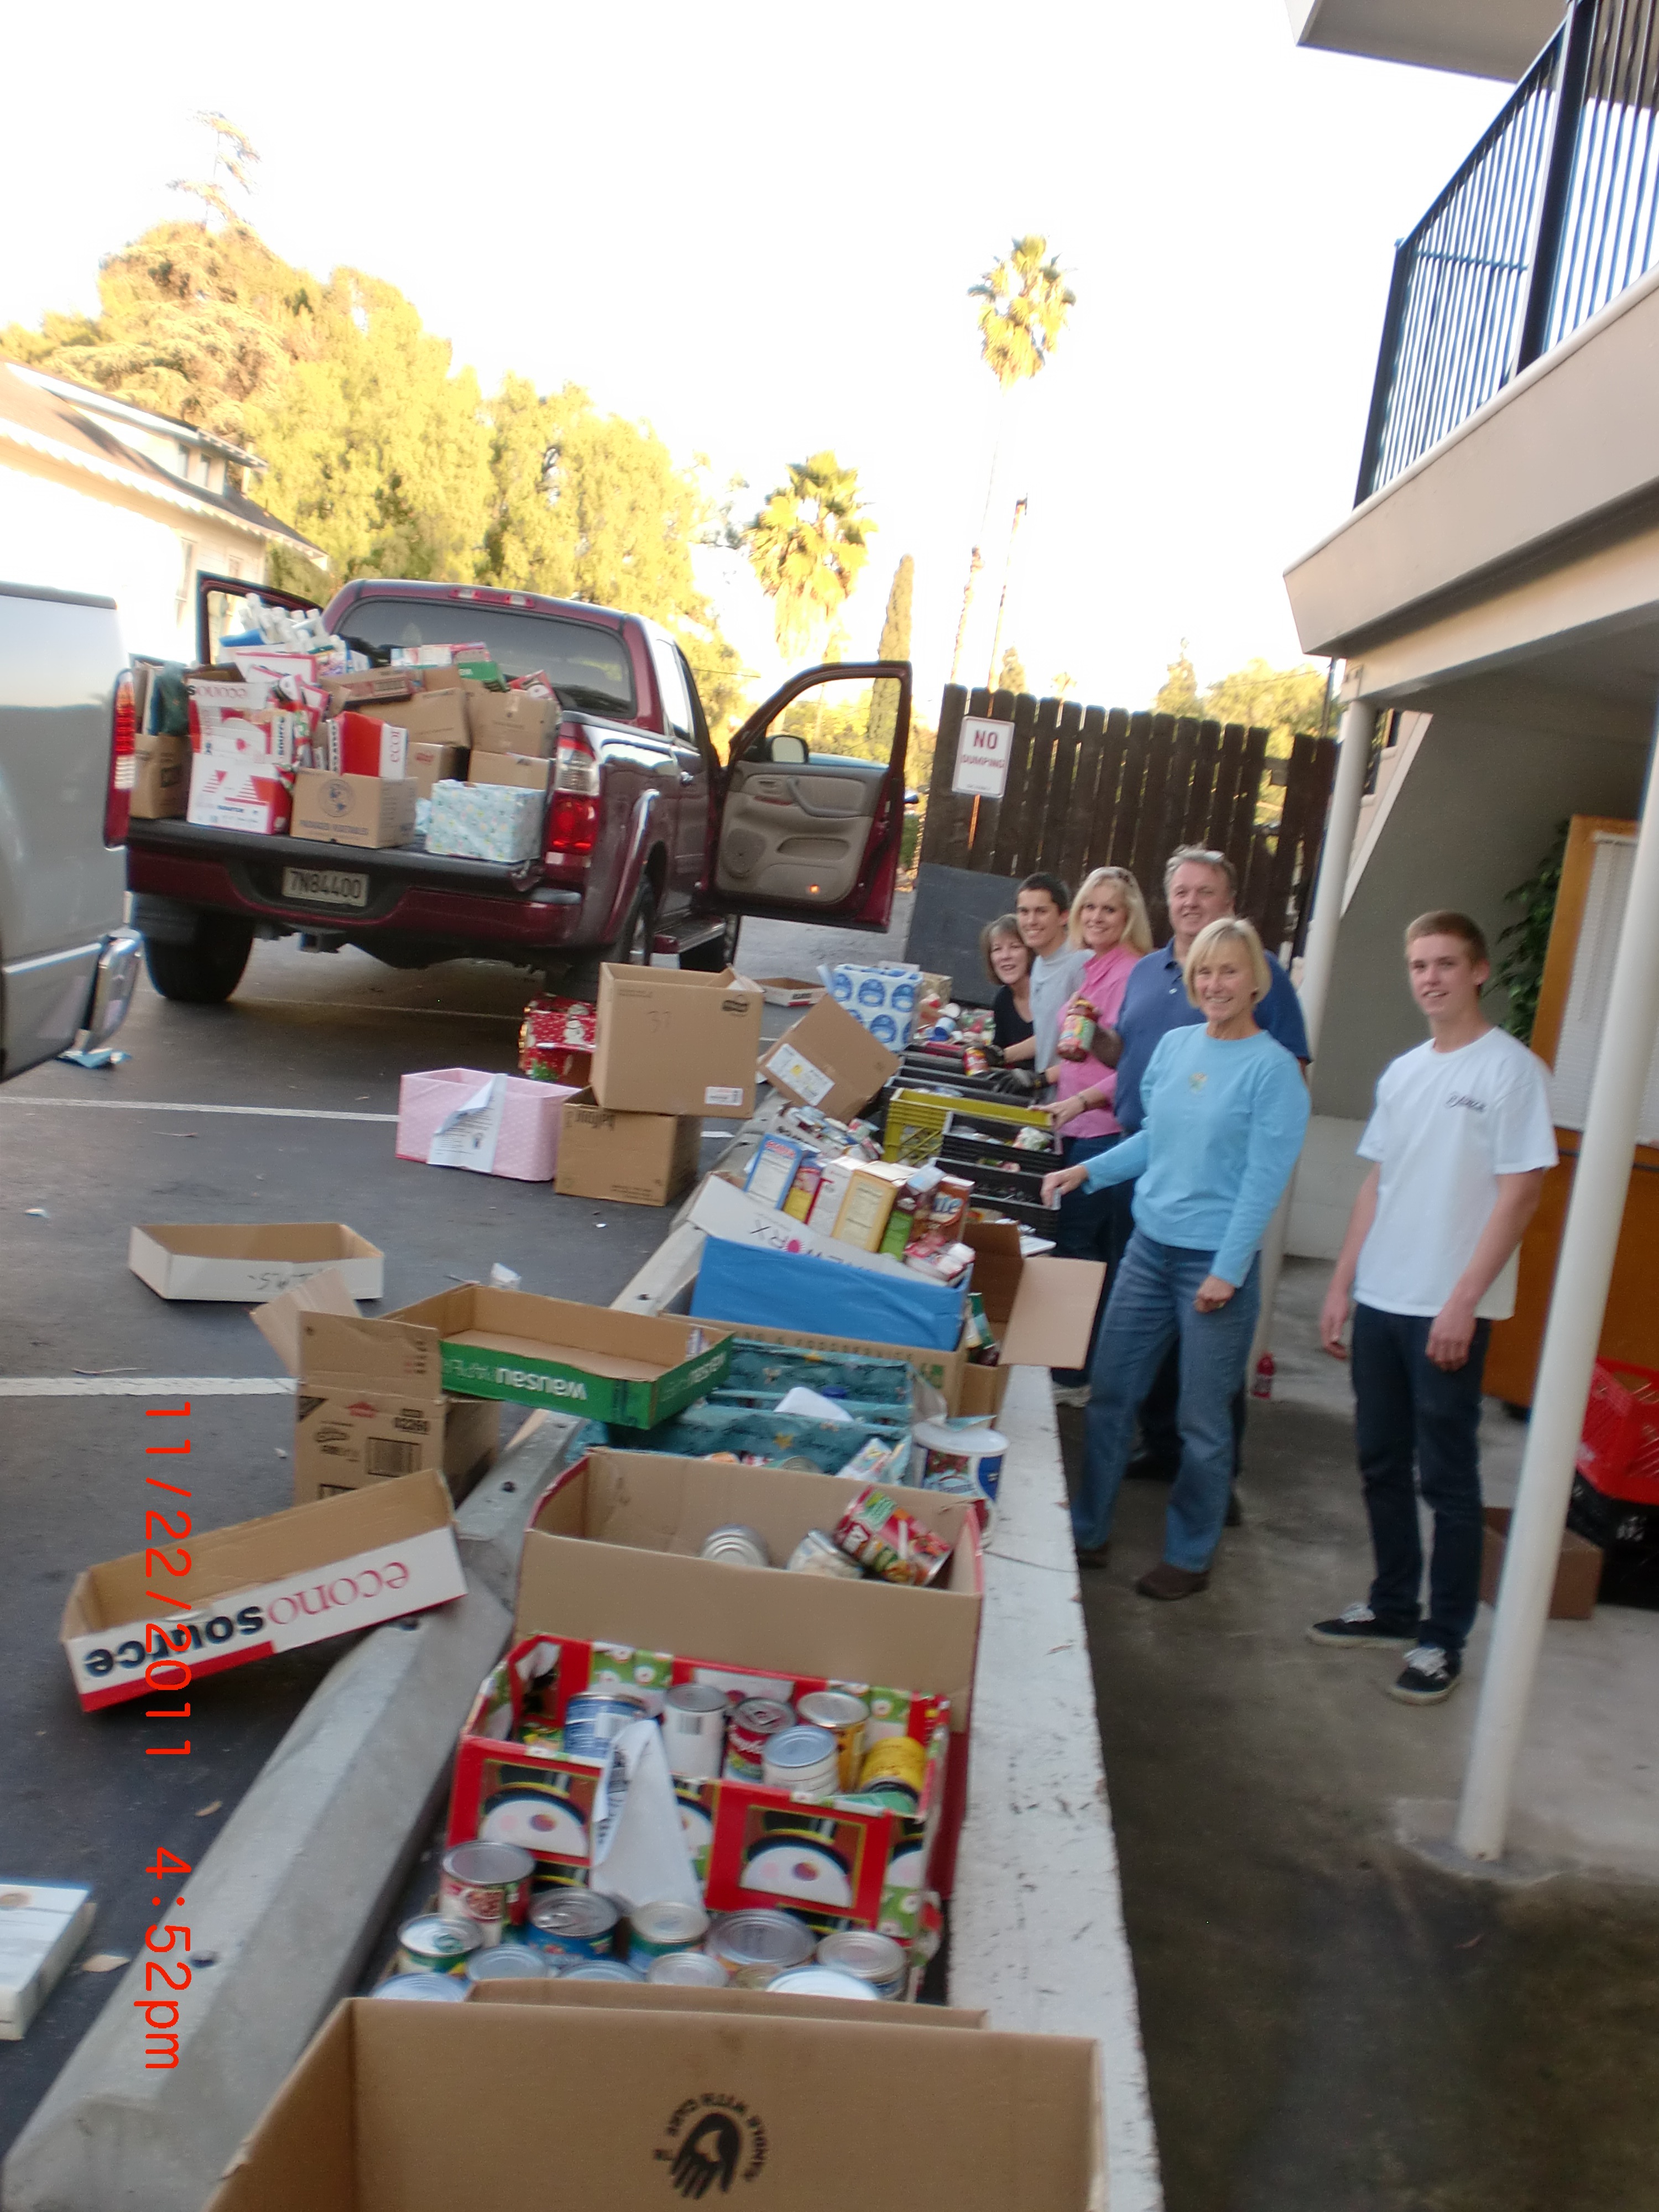 Yorba Linda Food for Families. As we enter this season of giving and